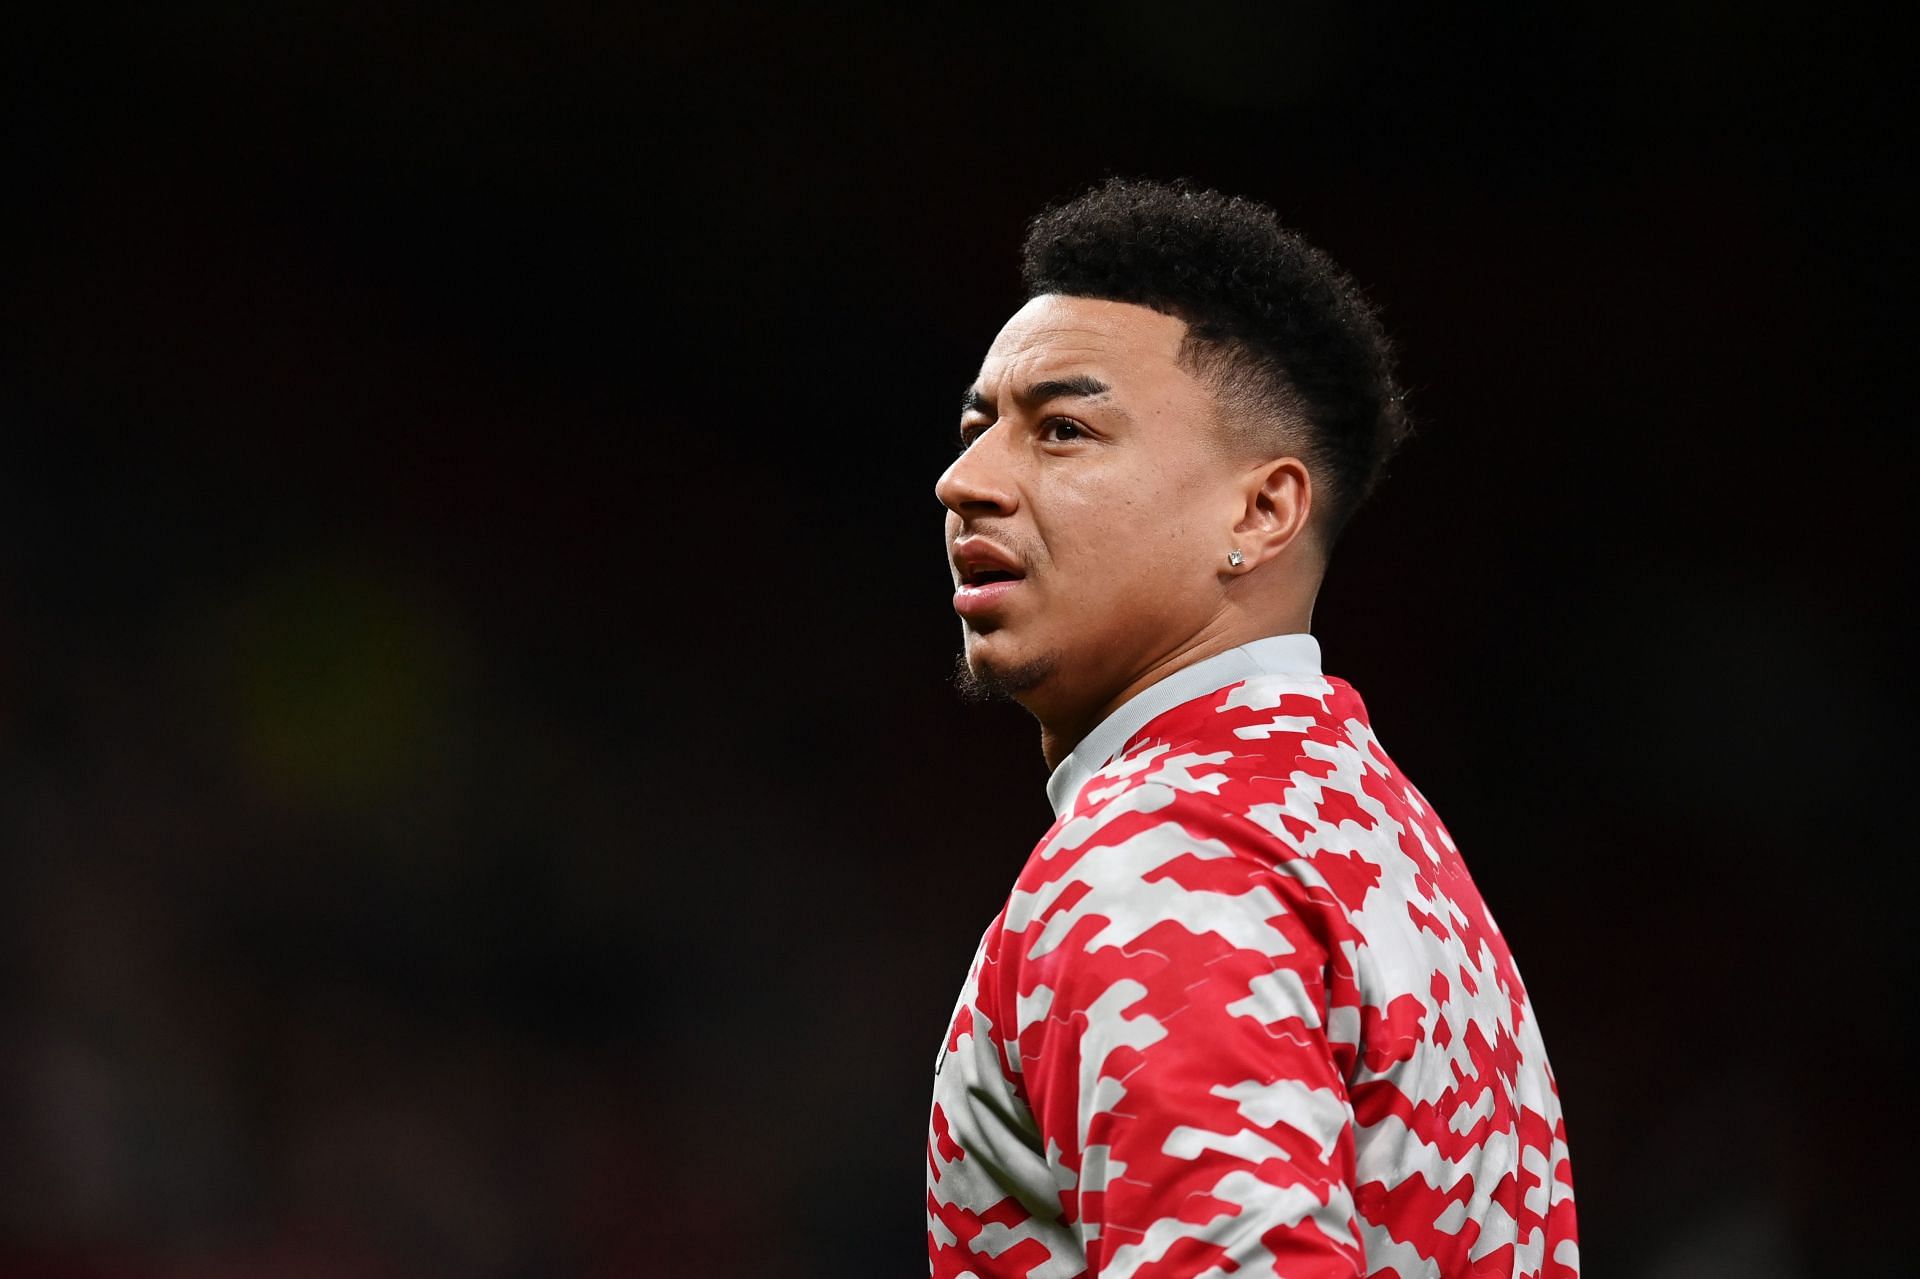 Jesse Lingard for Manchester United (via Getty Images)